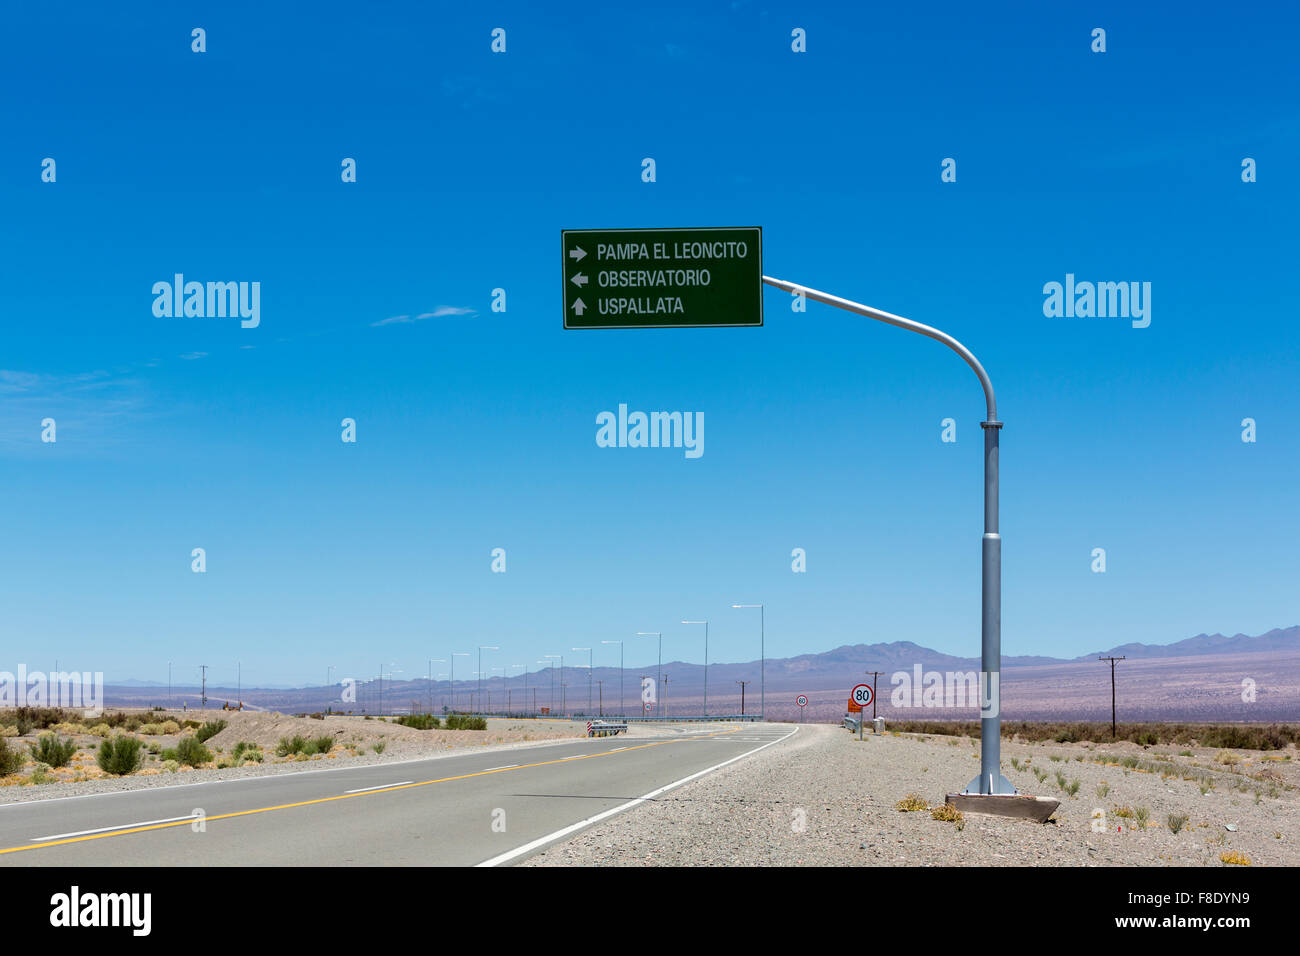 Directional road sign to Pampa El Leoncito on ruta 40, Argentina Stock Photo